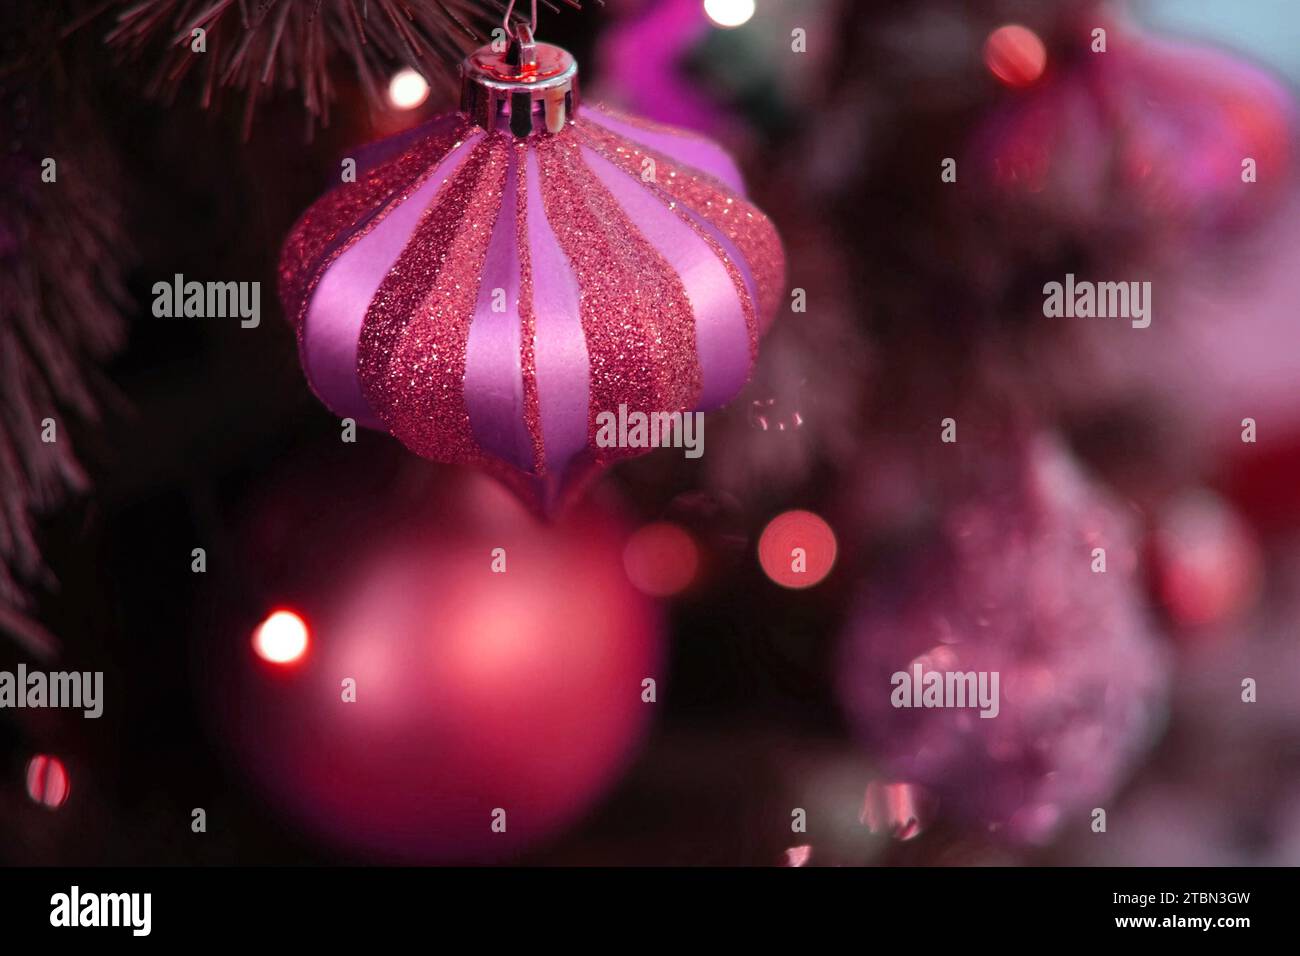 Christmas Ornaments Background. Gold and Pink Ornamented Glass Bauble. Christmas Tree with Globes, Bubbles. Shiny Sparkle Balls, Xmas Branches. Decora Stock Photo